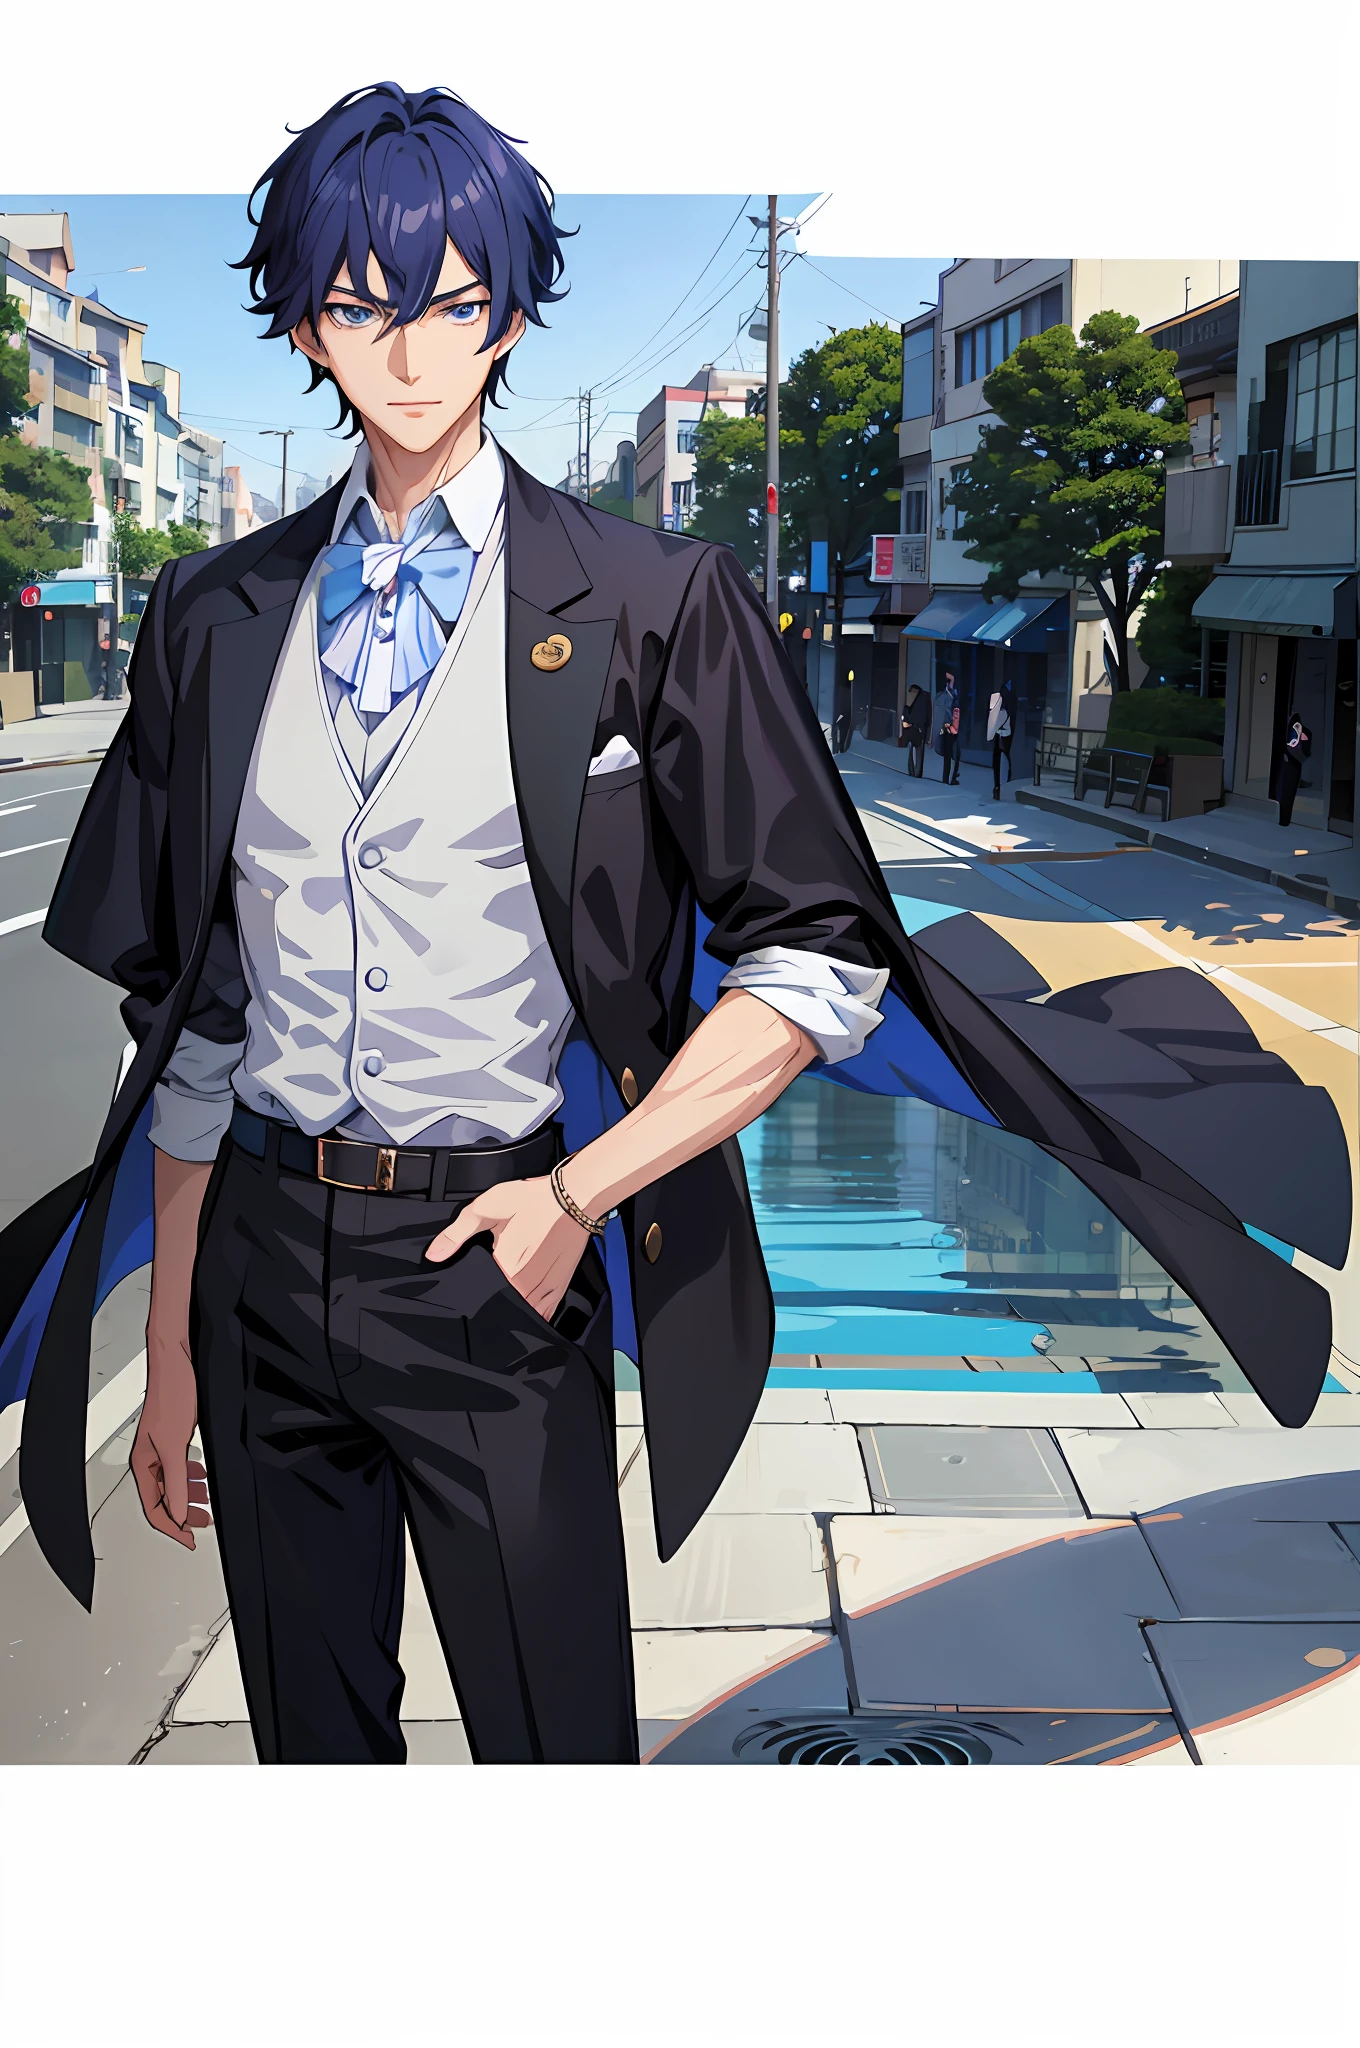 anime character in a suit standing on a city street, tall anime guy with blue eyes, handsome anime pose, anime handsome man, ((wearing aristocrat robe)), anime portrait of a handsome man, young anime man, male anime style, male anime character, official character illustration, shigenori soejima illustration, handsome guy in demon slayer art